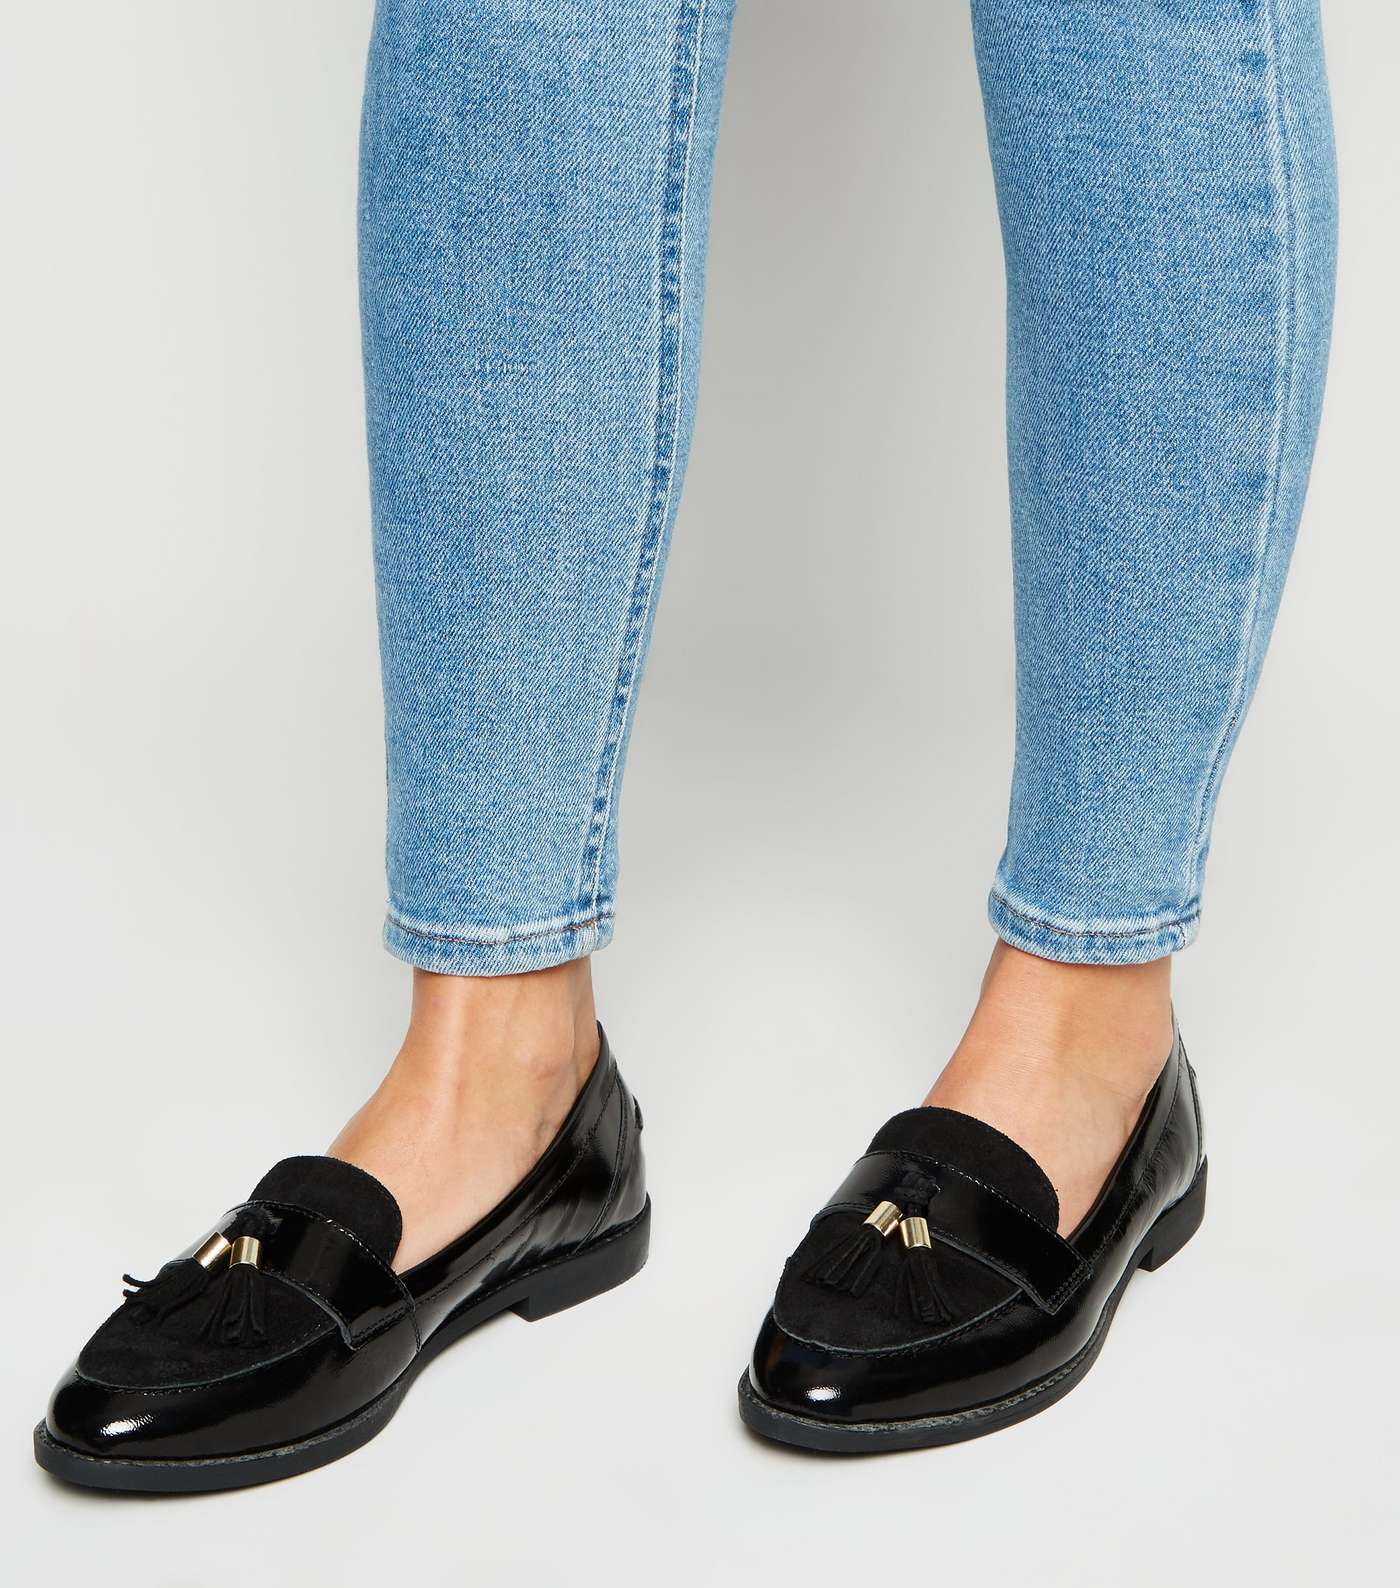 Black Suede and Leather Tassel Trim Loafers Image 2